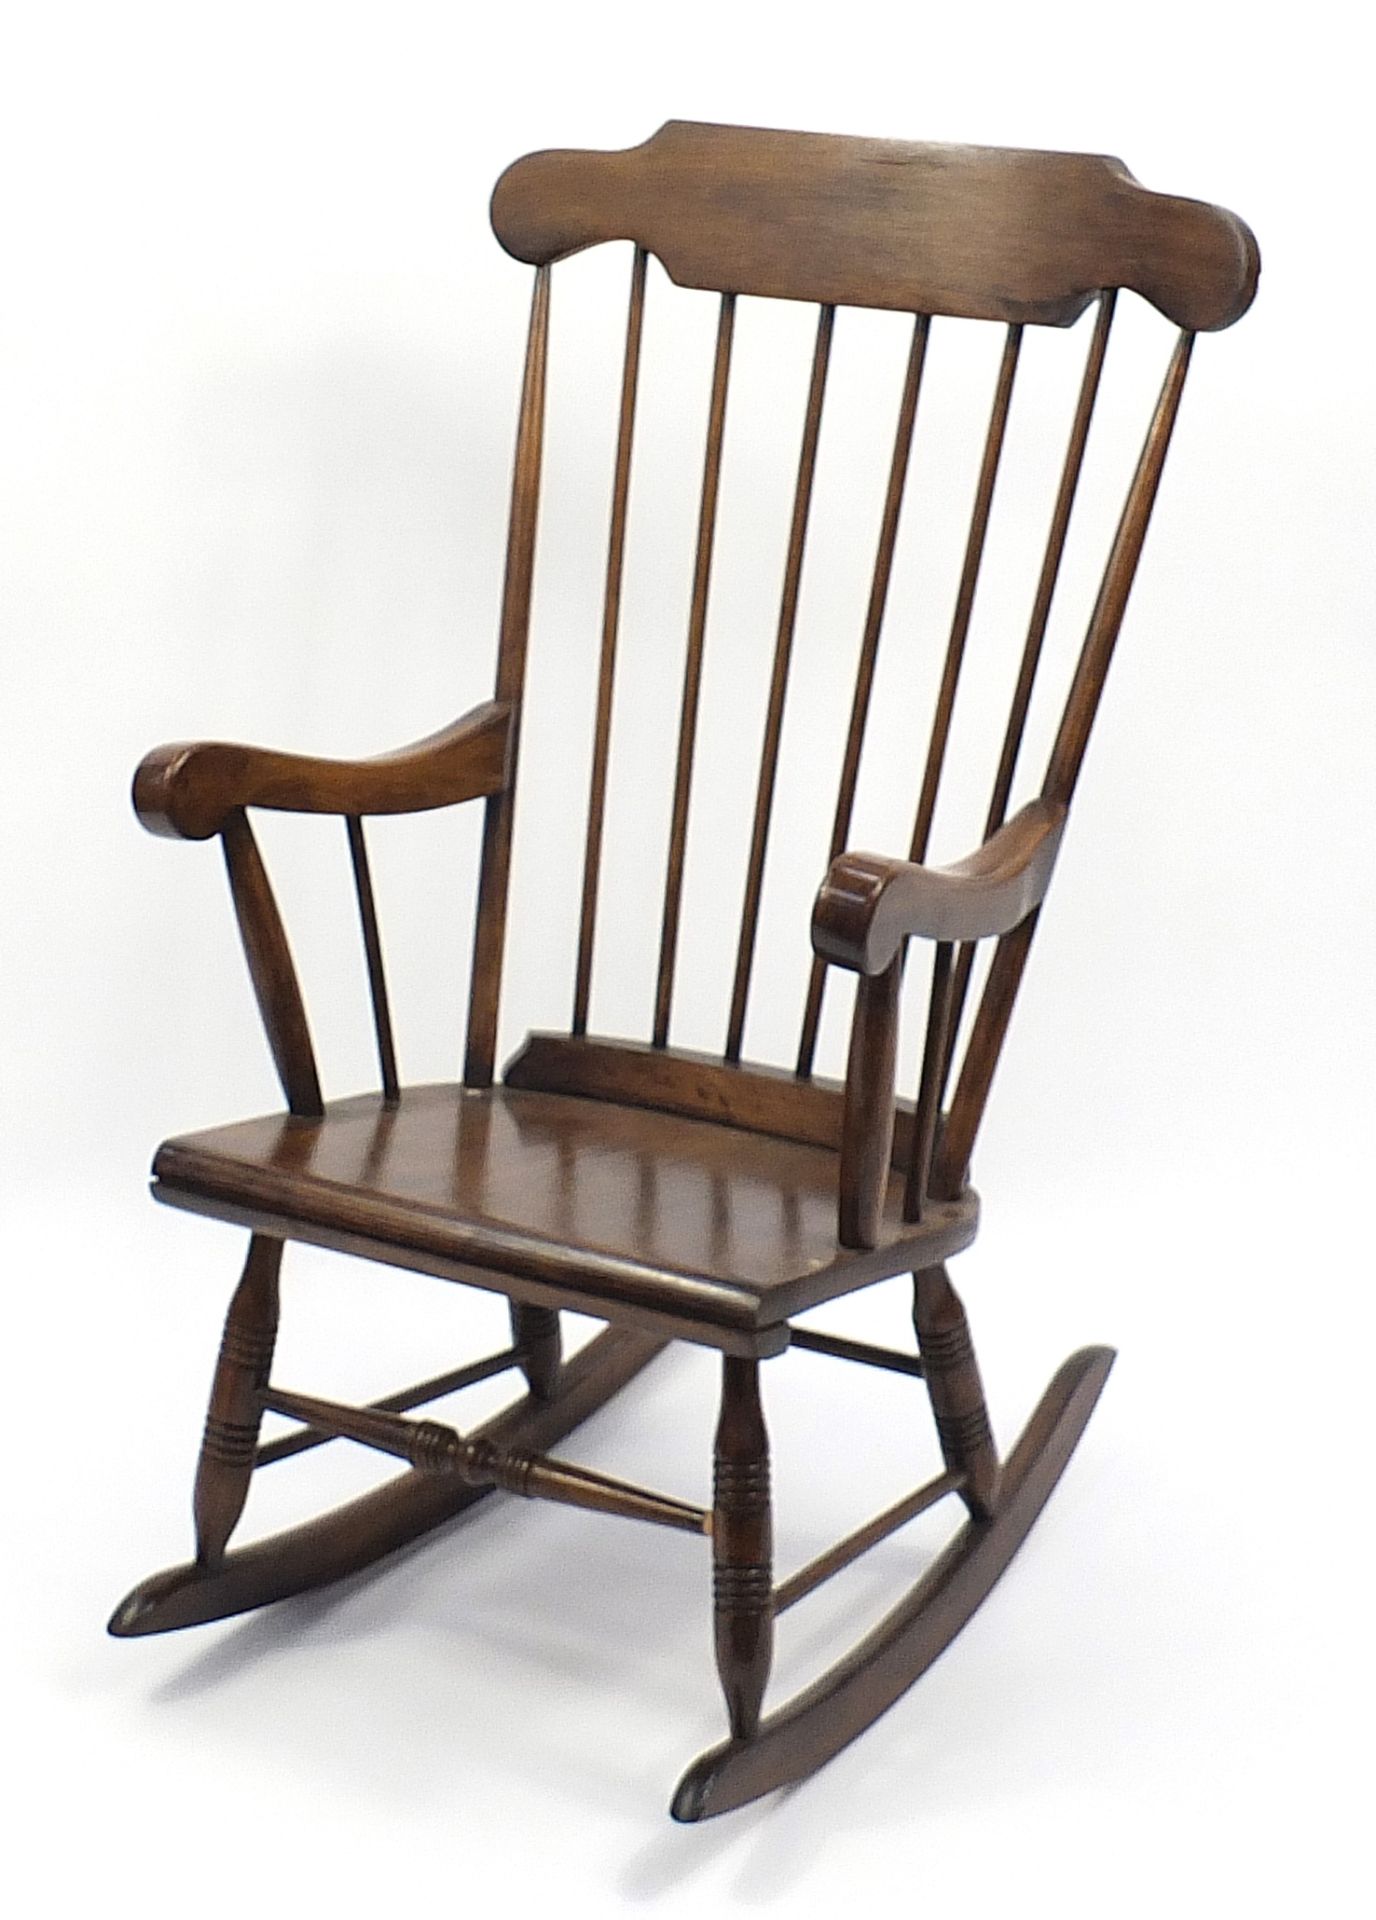 Stained wood stick back rocking chair, 105cm high